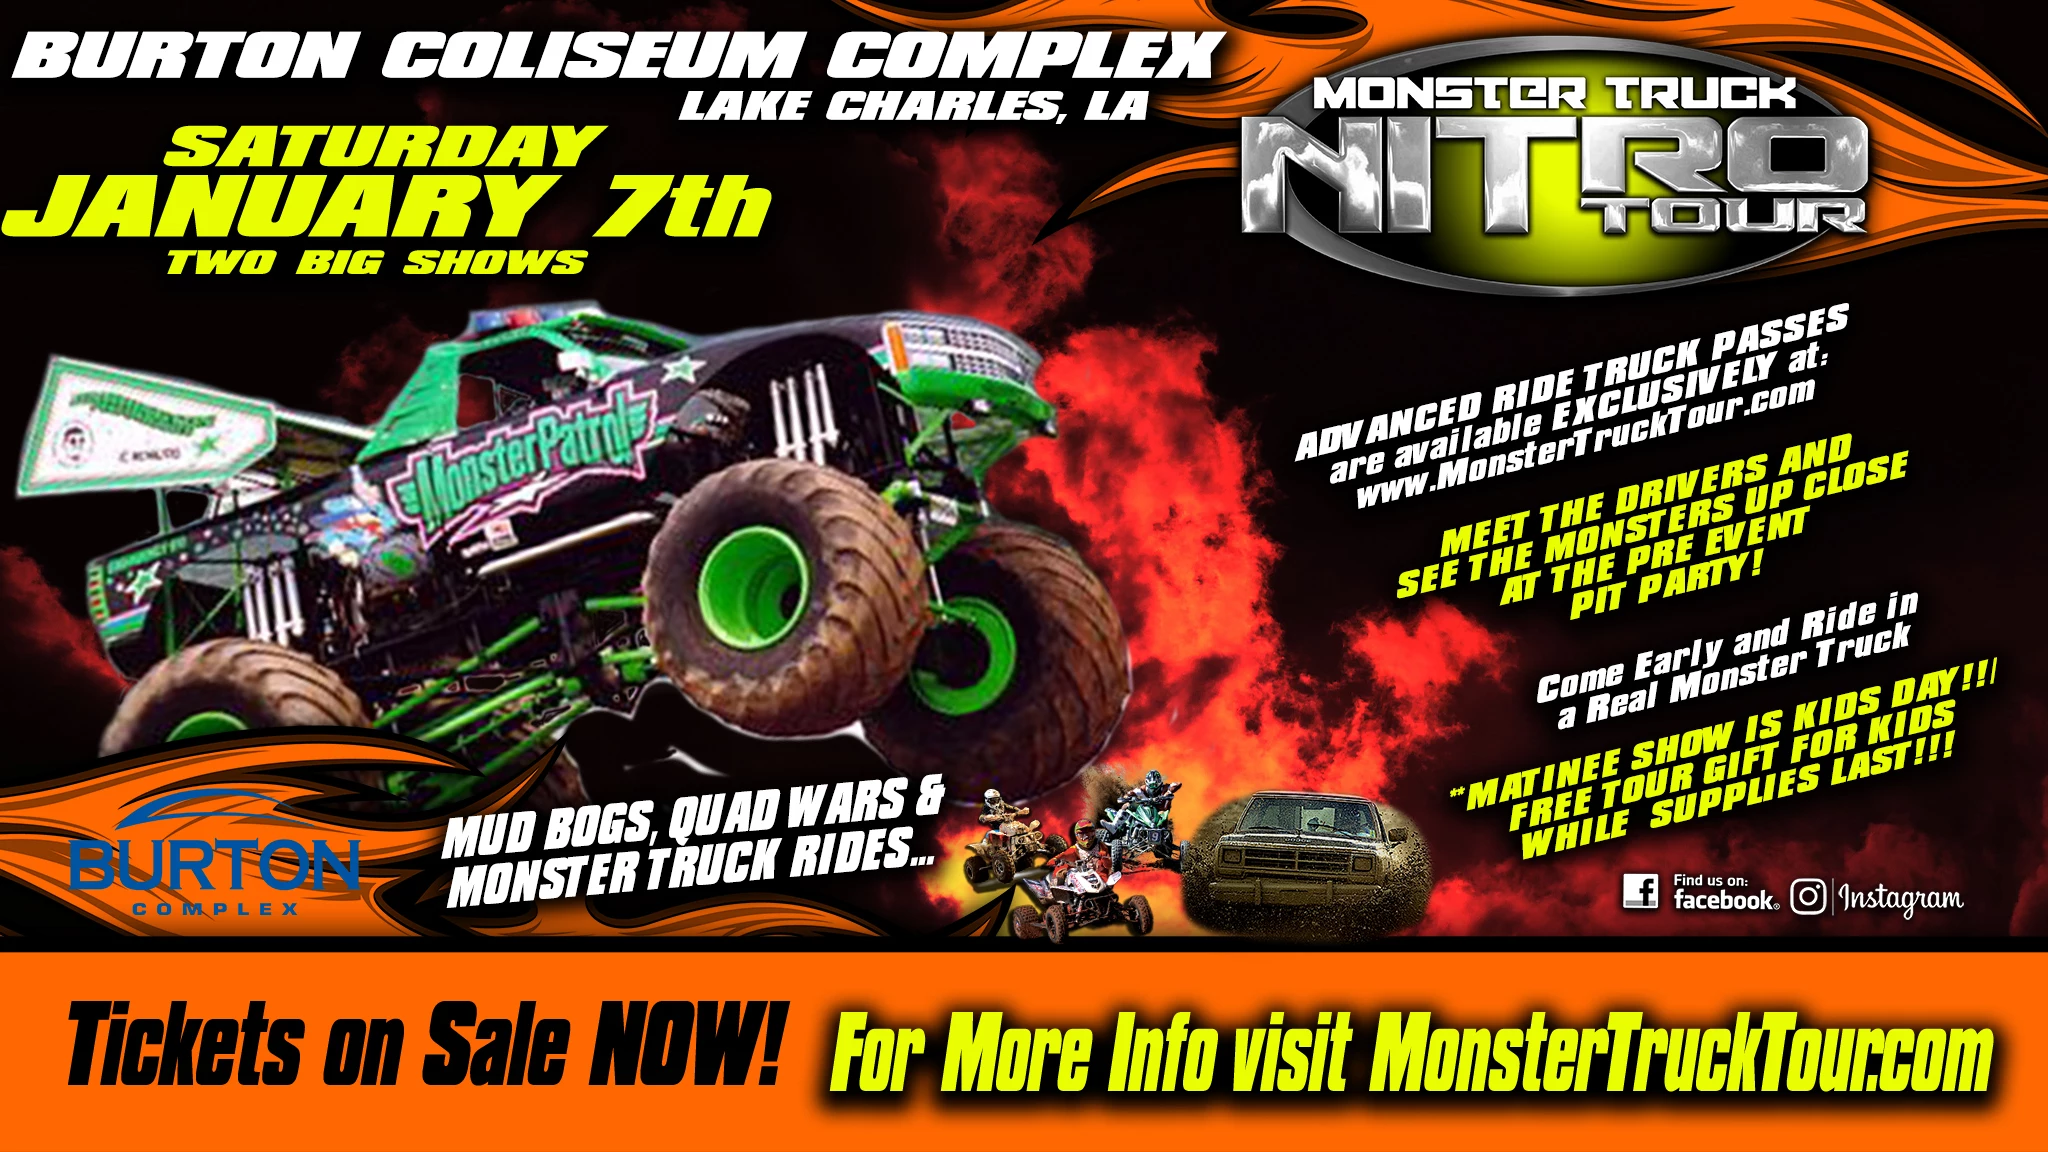 Monster Truck Nitro Tour 'Glow Show' rolls into town - American Press